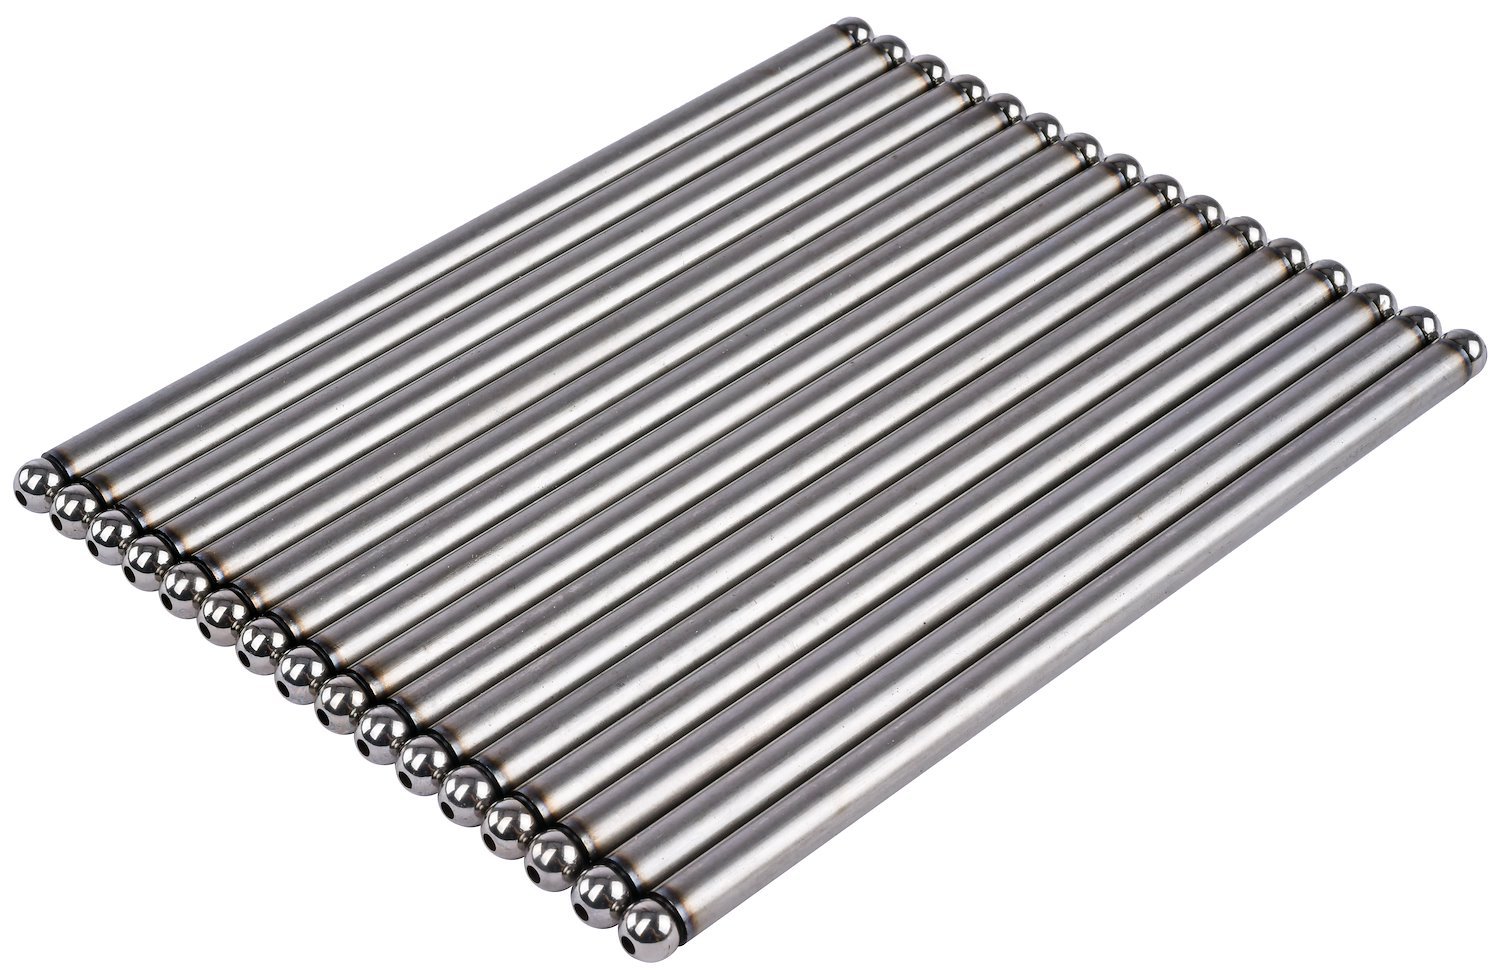 6.881 in. Long Pushrods for Small Block Ford 255-302 V8